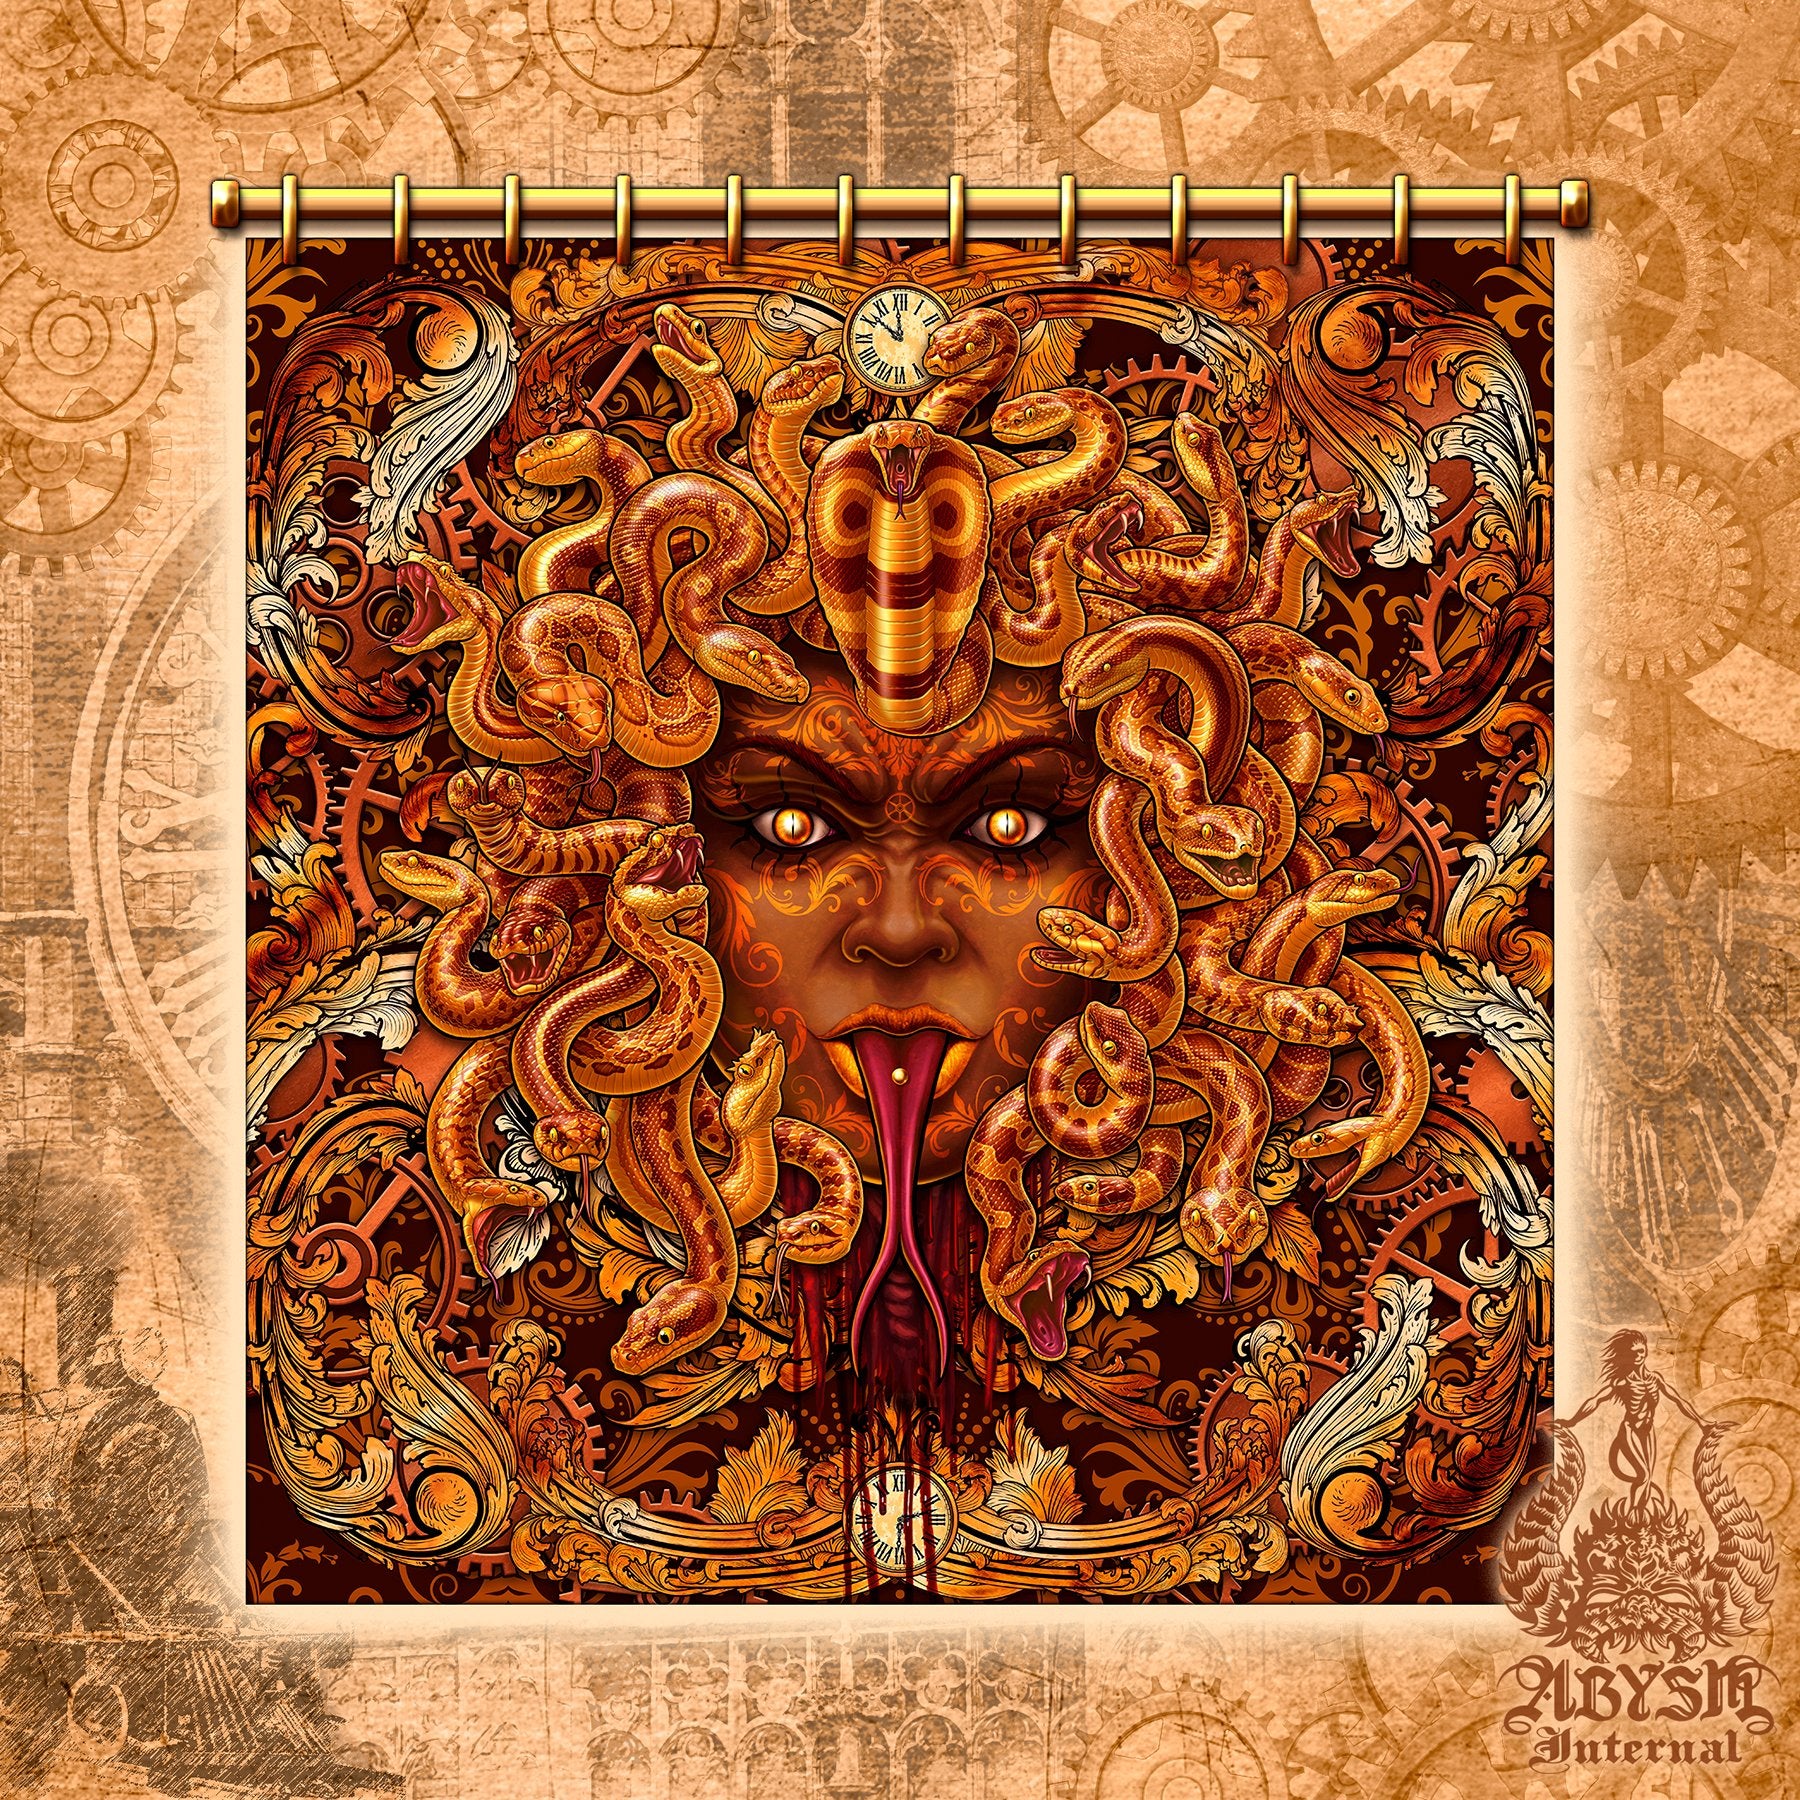 Steampunk Shower Curtain, 71x74 inches, Medusa Bathroom Decor, Fantasy - 3 Faces, Skull and Bronze Snakes - Abysm Internal